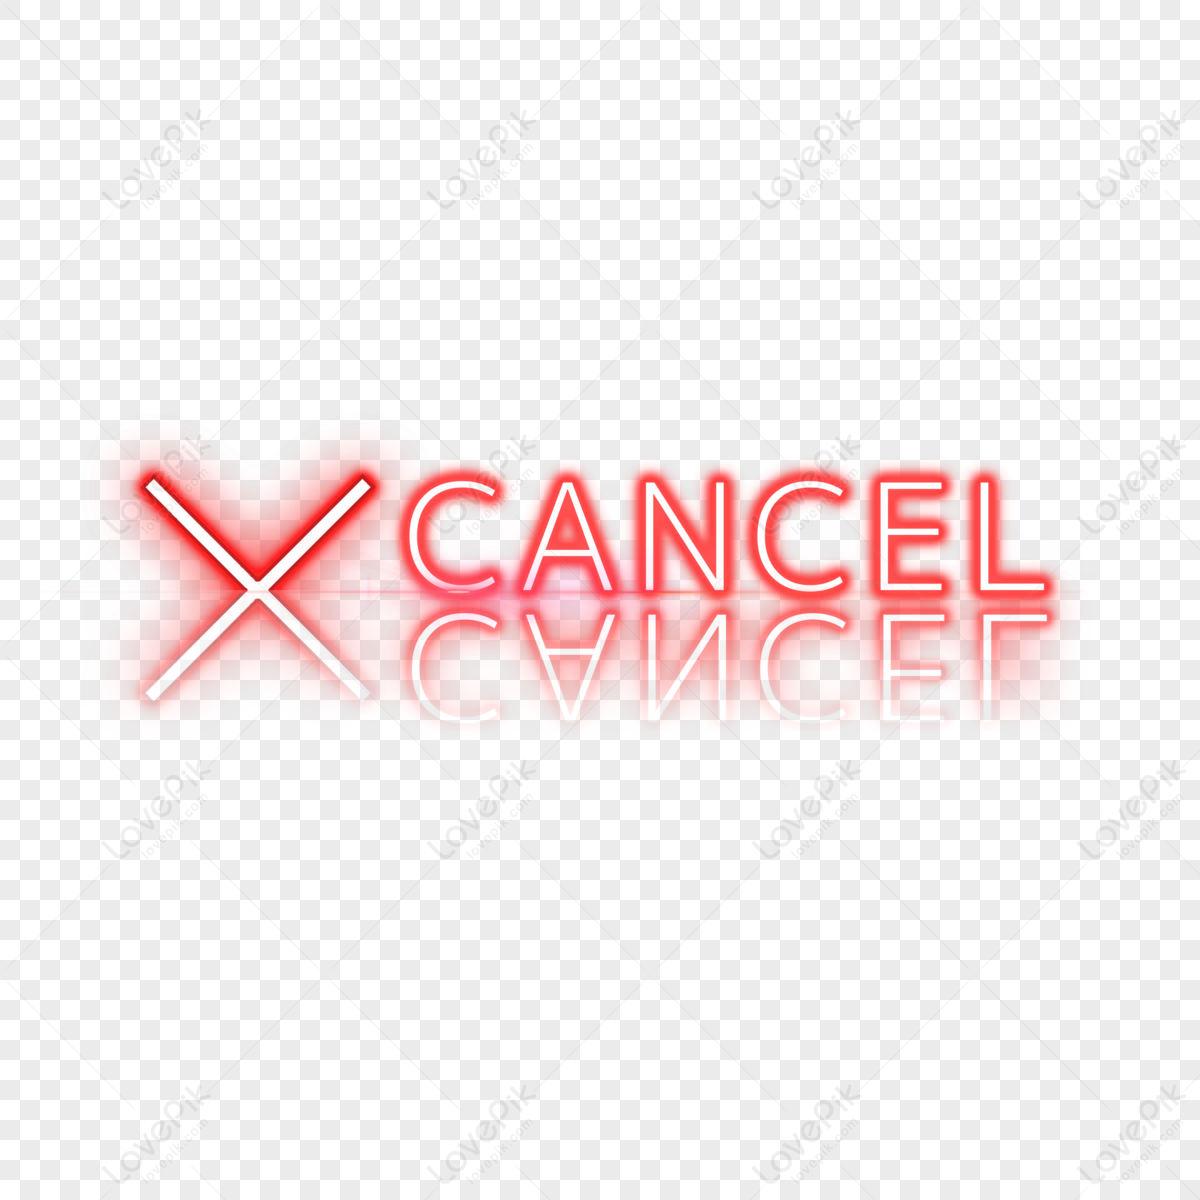 Stop Cancel Culture - Openclipart